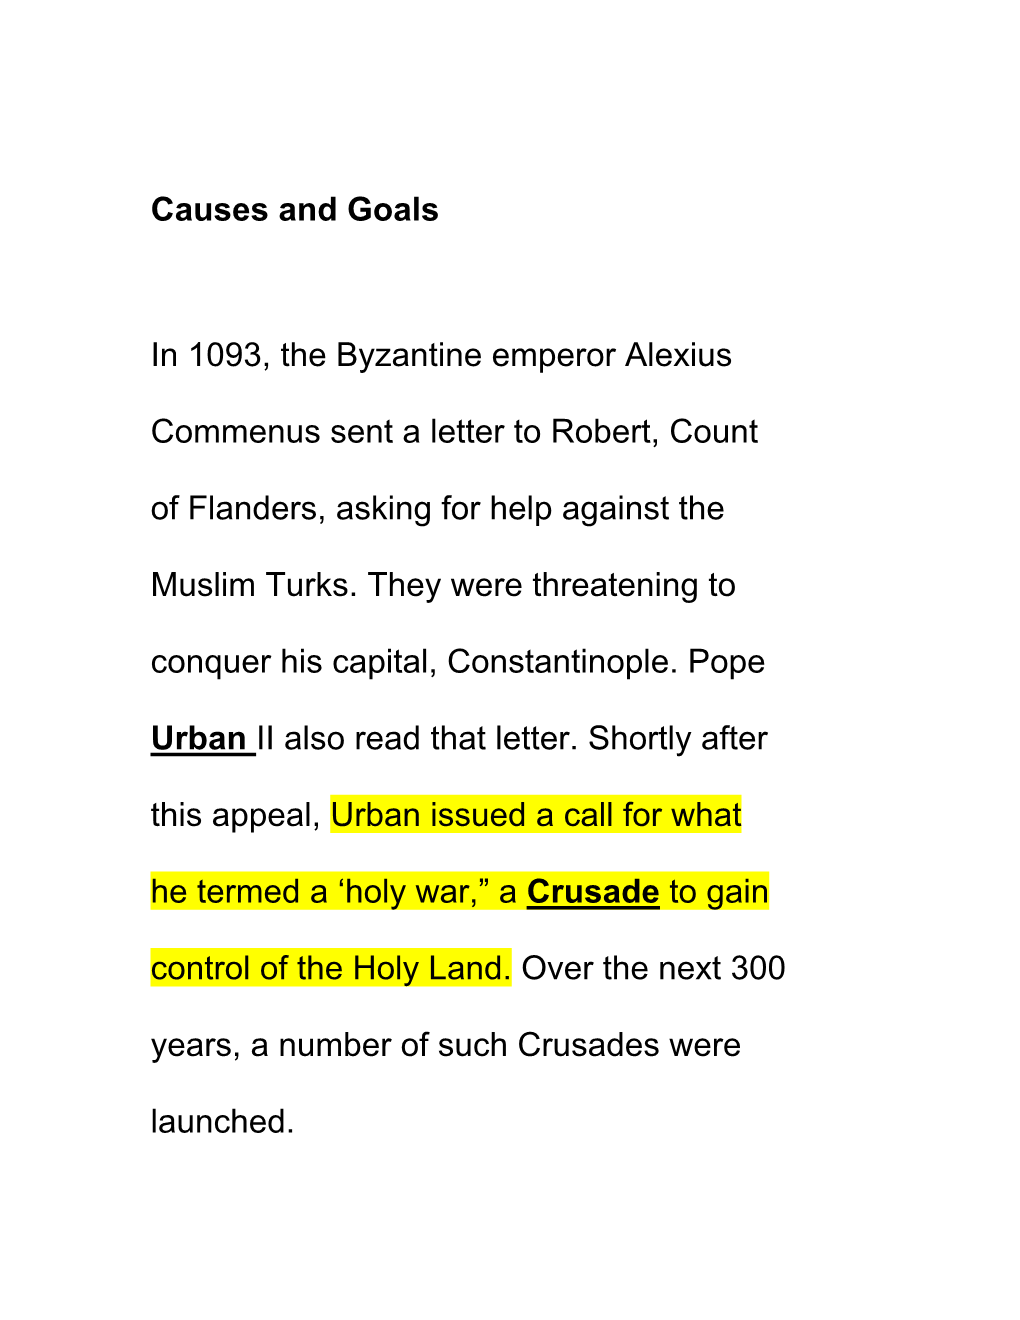 Causes and Goals in 1093, the Byzantine Emperor Alexius